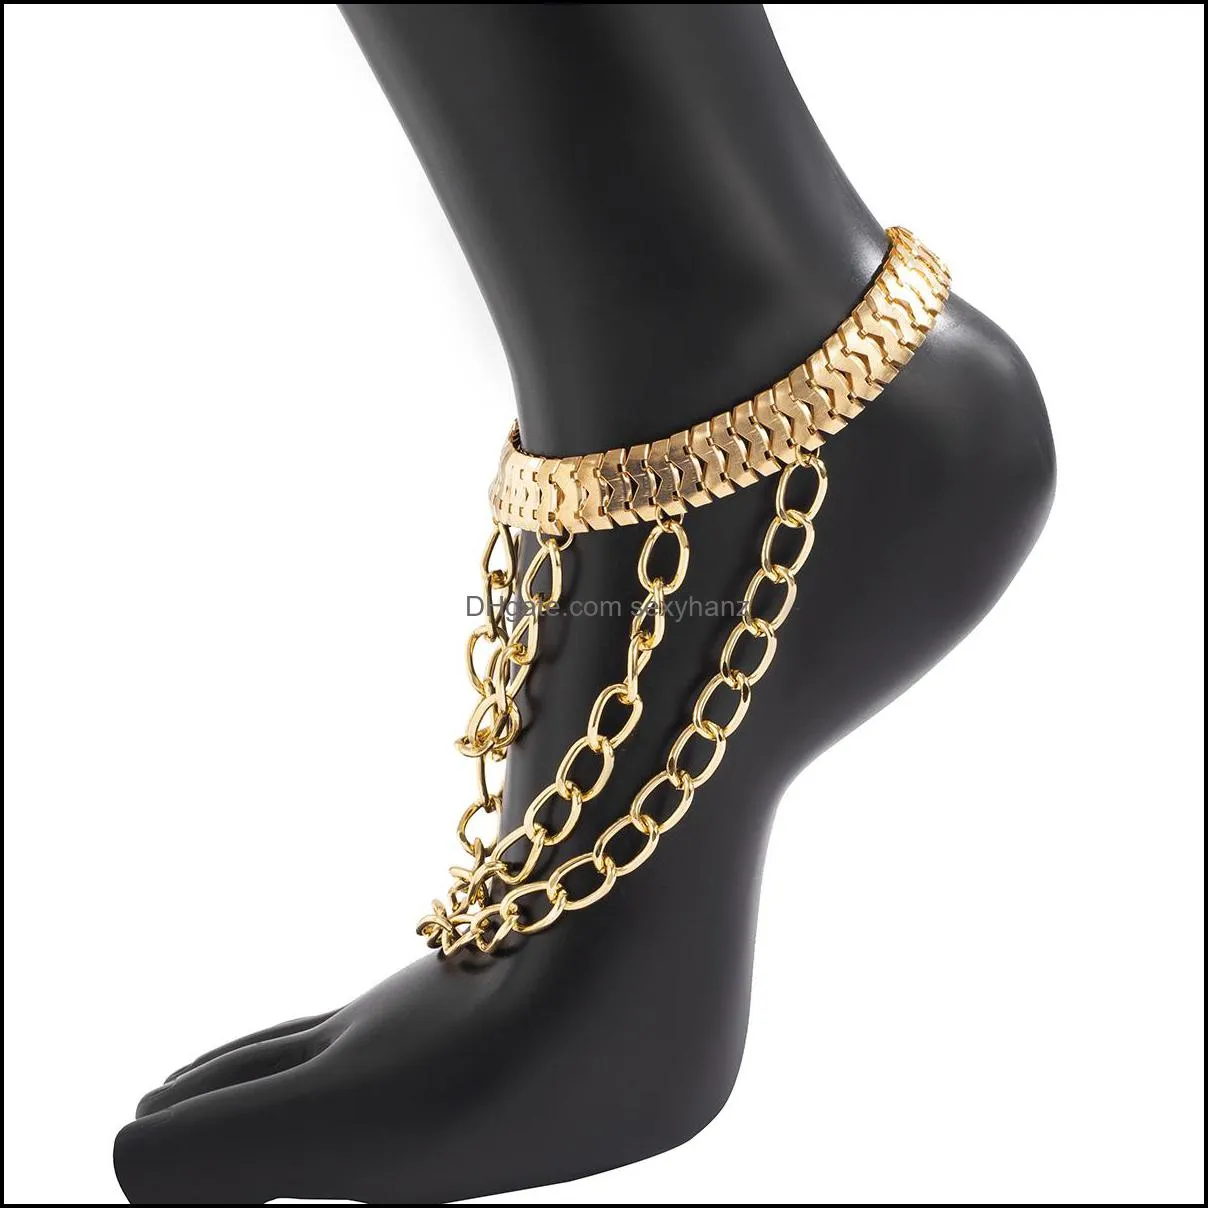 Vintage Snake Chain Arrow Charm Anklets for Women Bijoux Femme Unique Tassel Chunky Tennis Link Sandals Summer Foot Jewelry